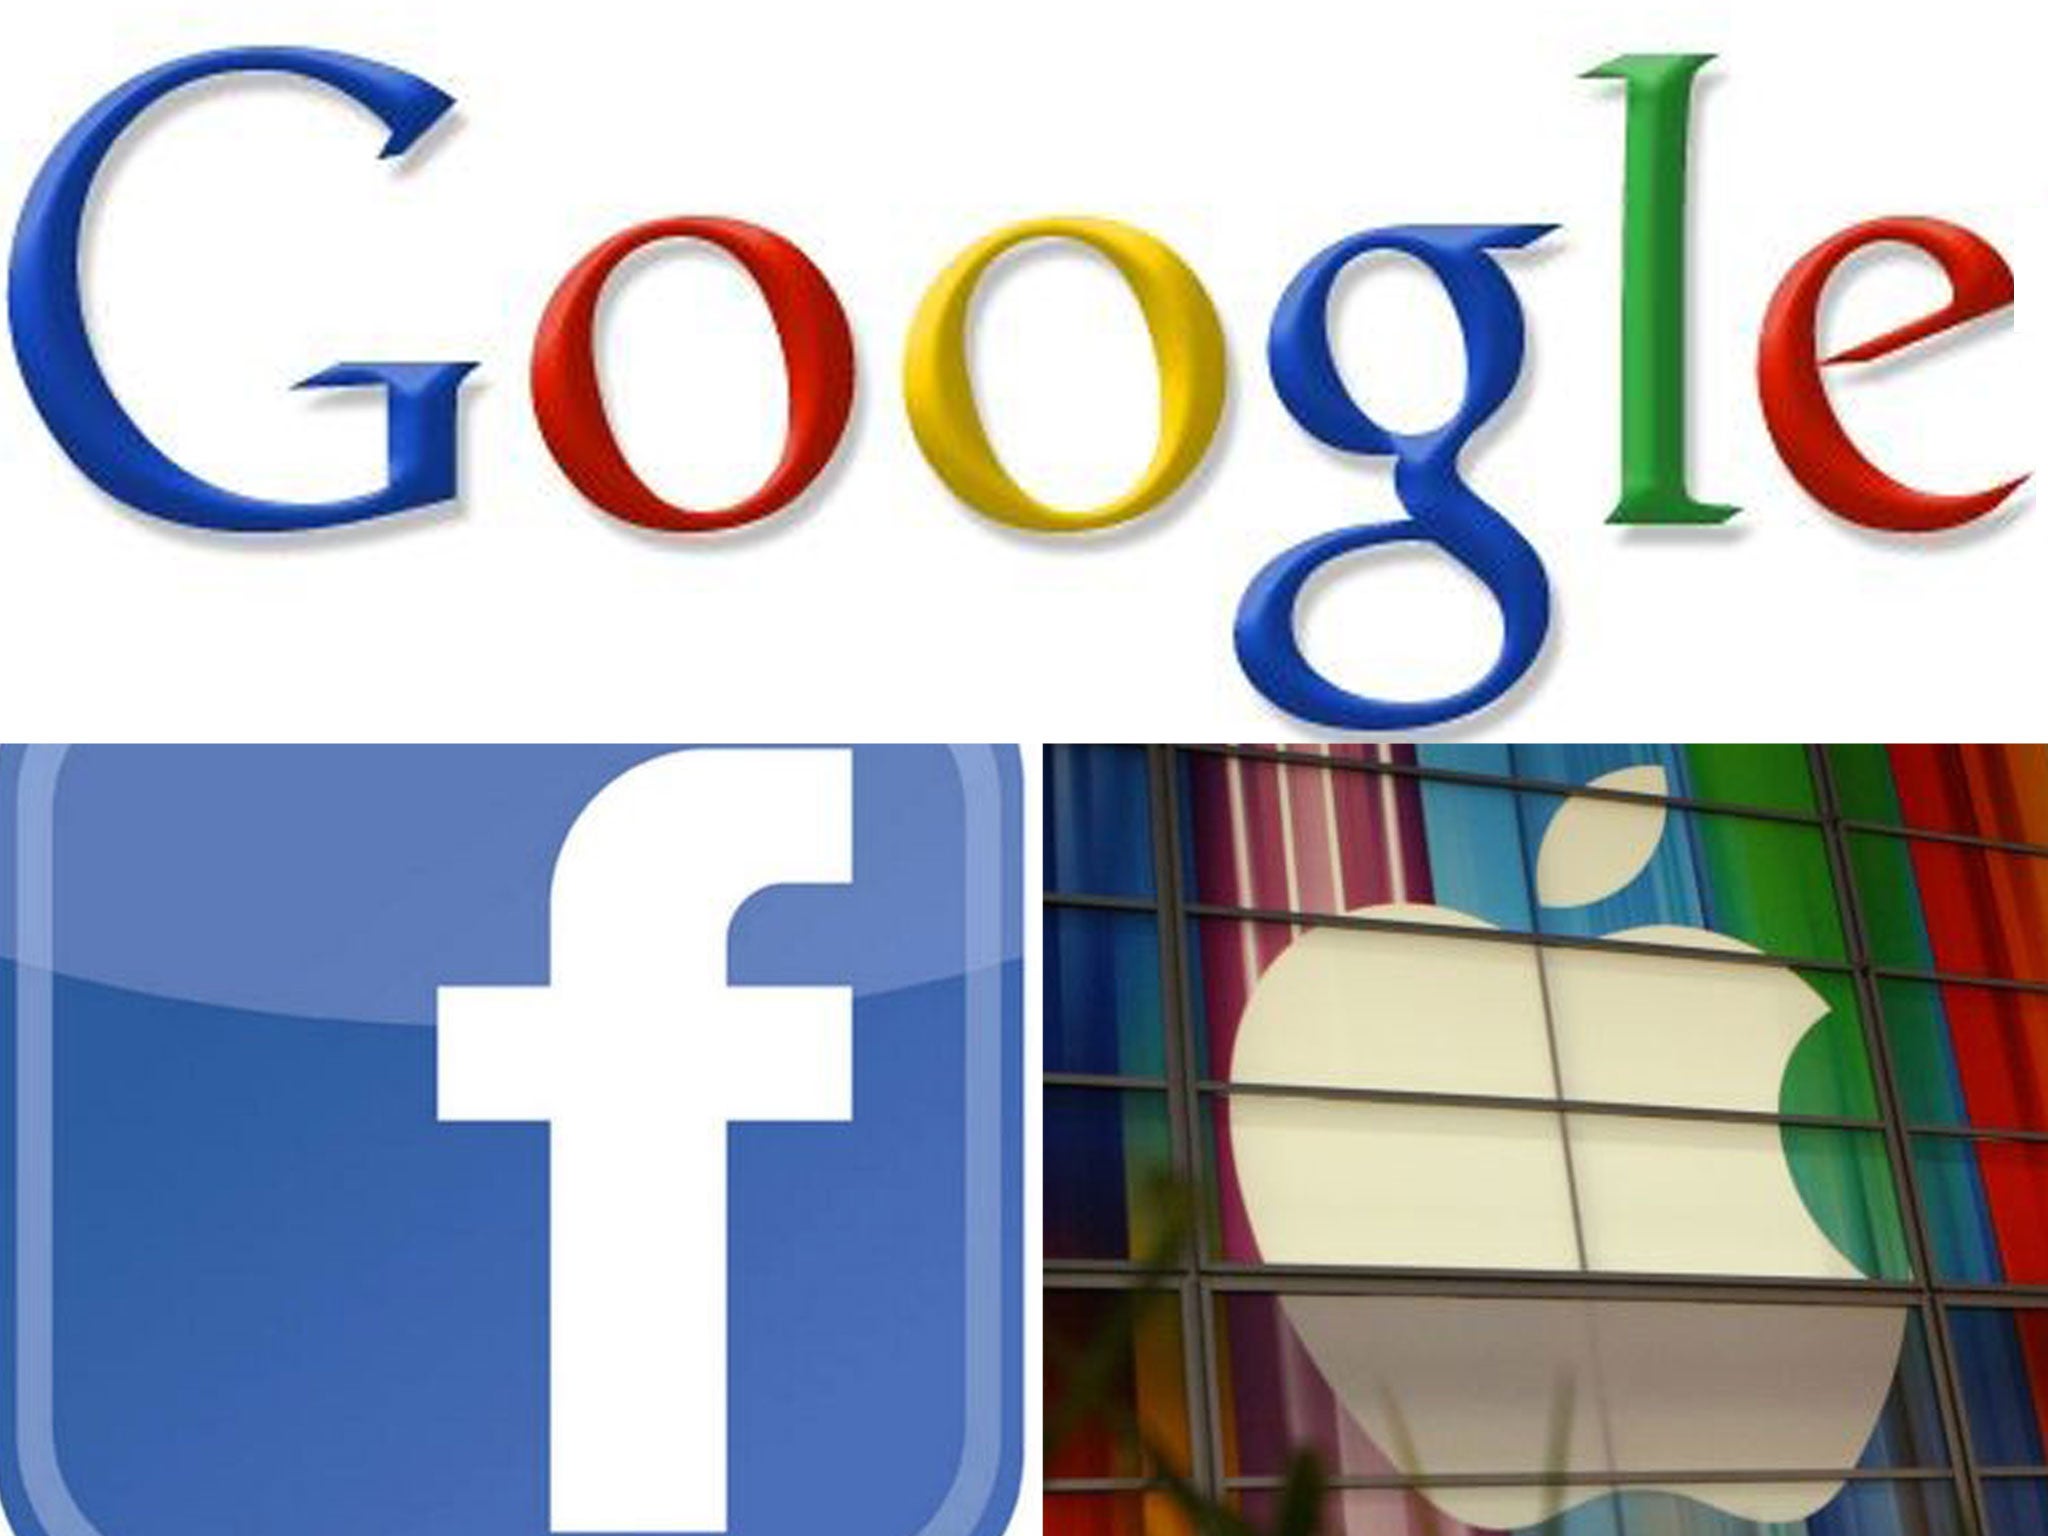 Google has beaten off Facebook and Apple in a poll to find America's most popular tech firm